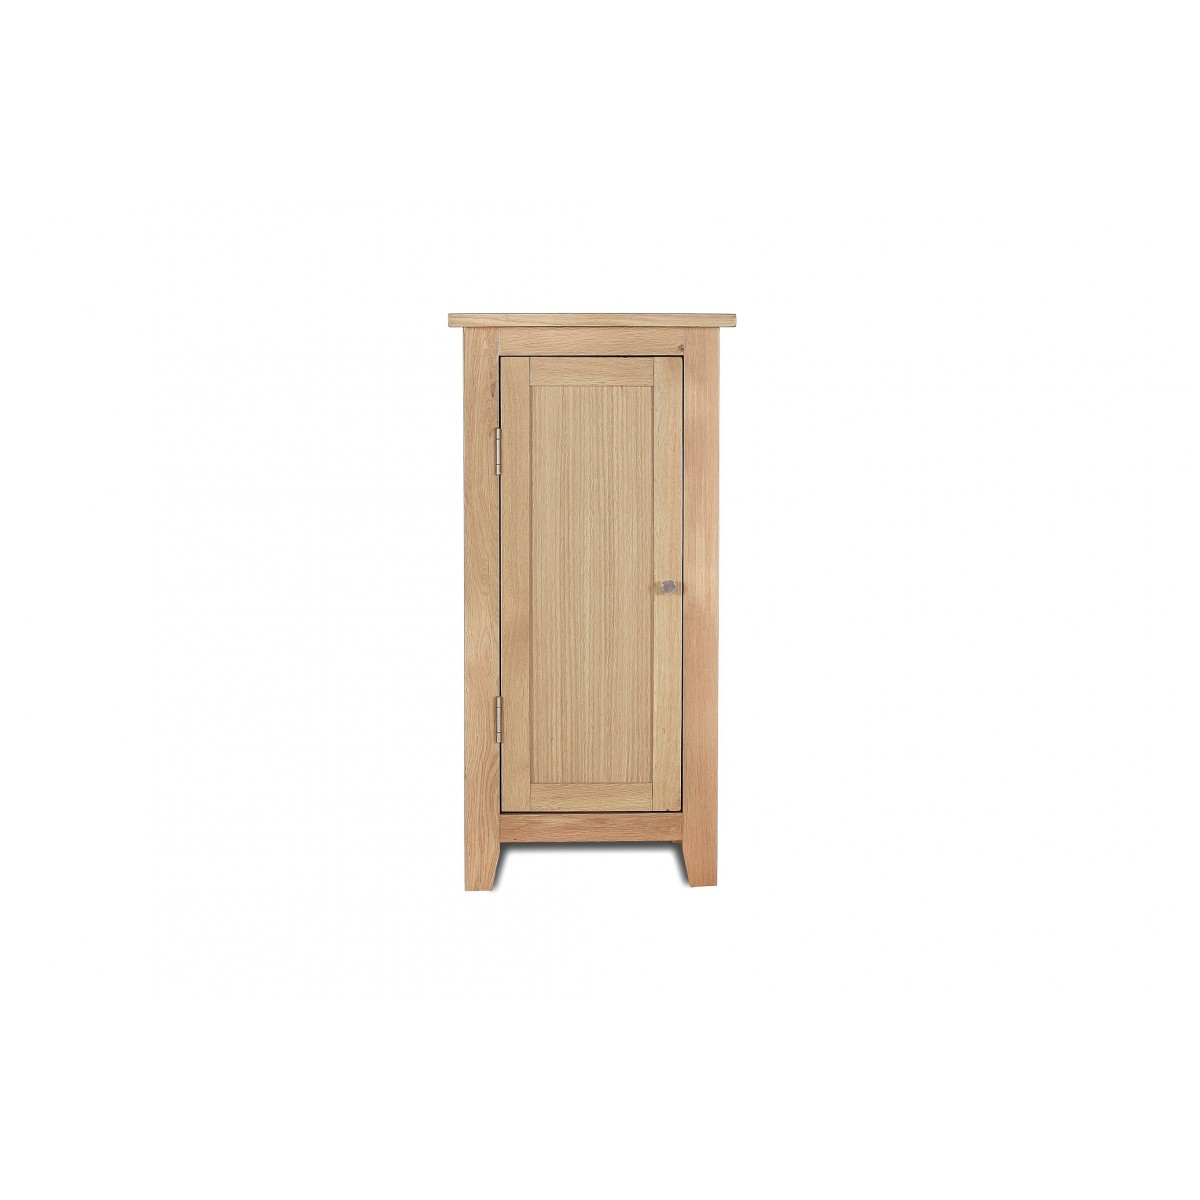 Lpd Ocean Small Bathroom Storage Cabinet Oak intended for proportions 1200 X 1200